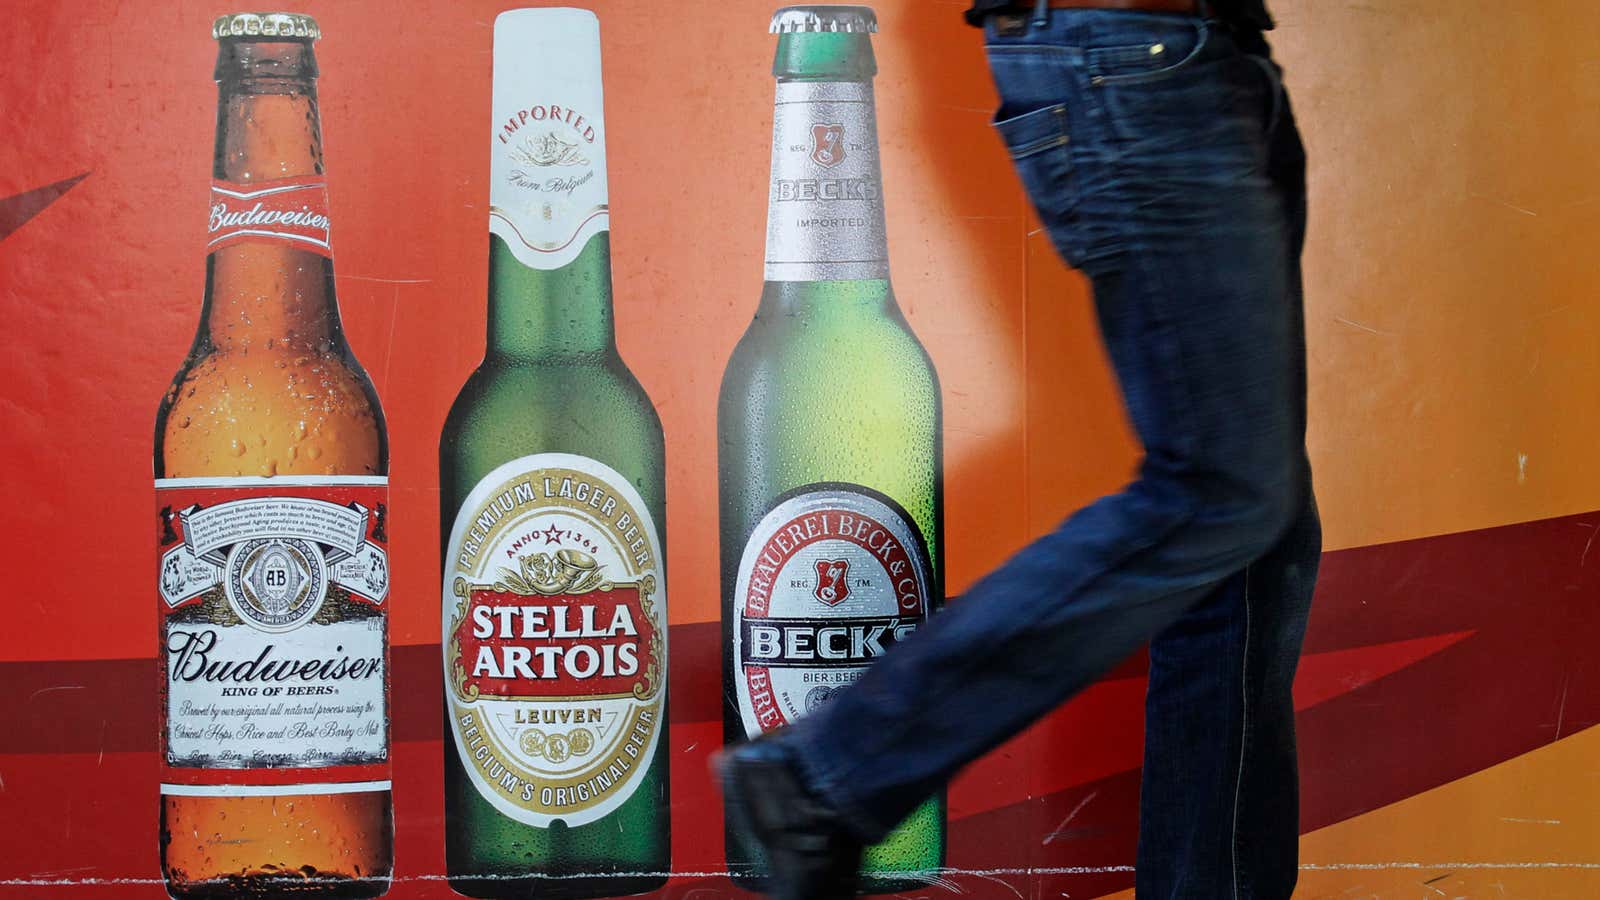 A 10% stake in the world’s largest beer company goes down smooth.